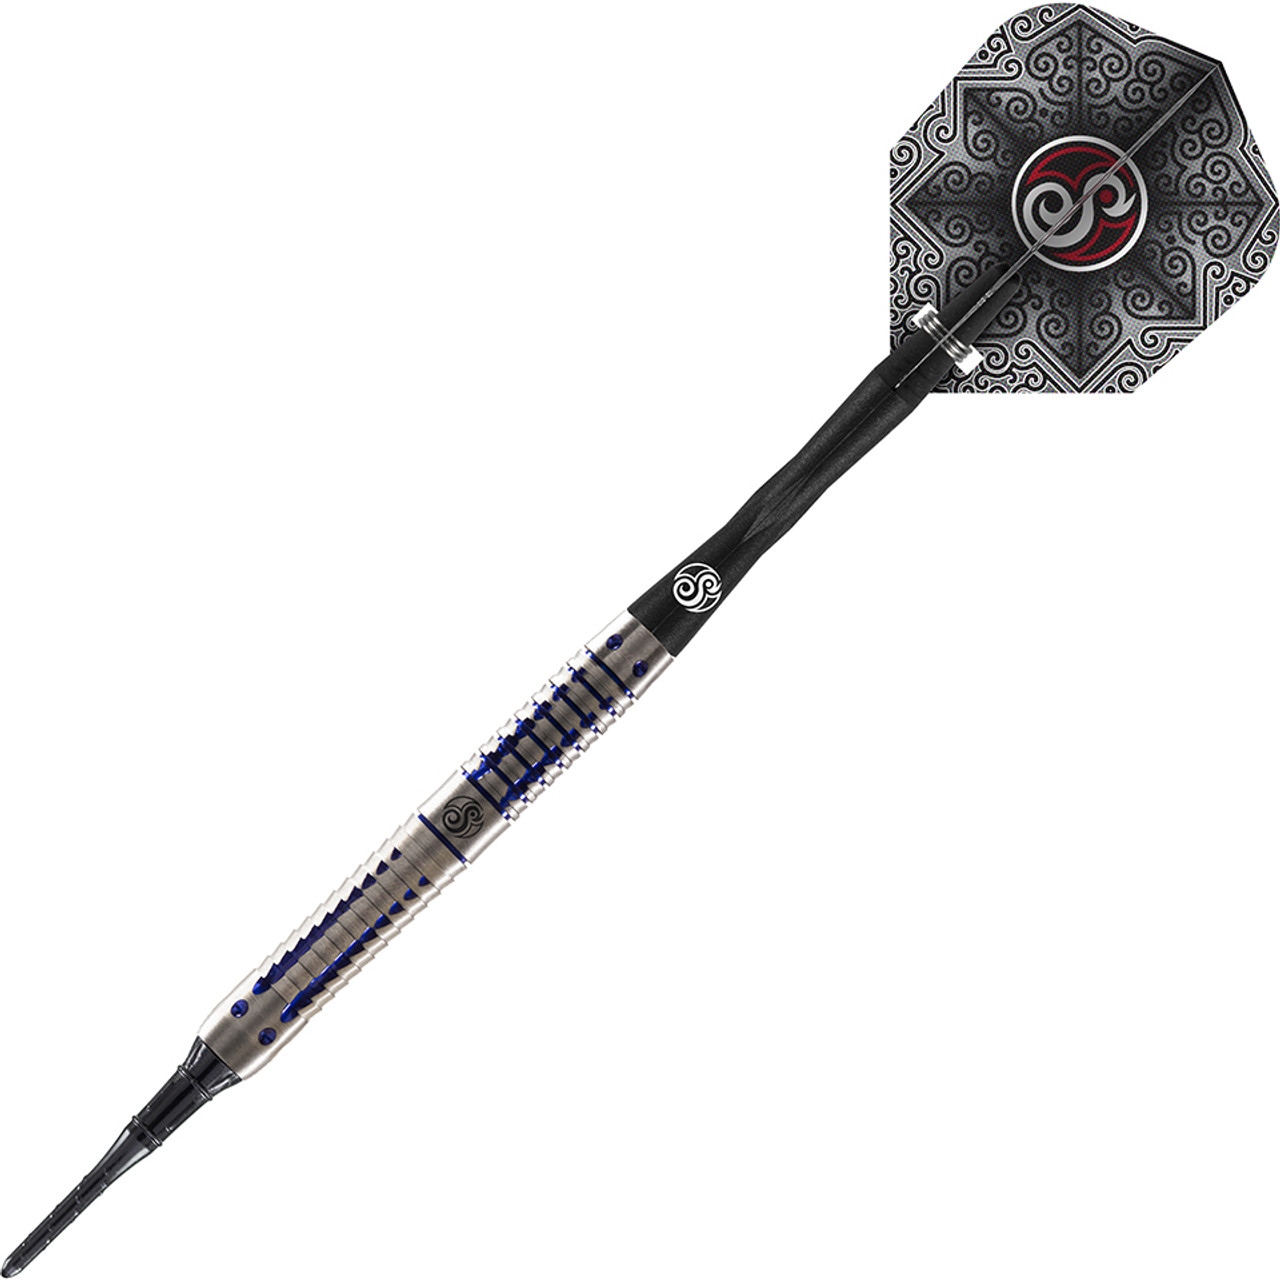 The Dagger Soft Tip Darts by Shot 